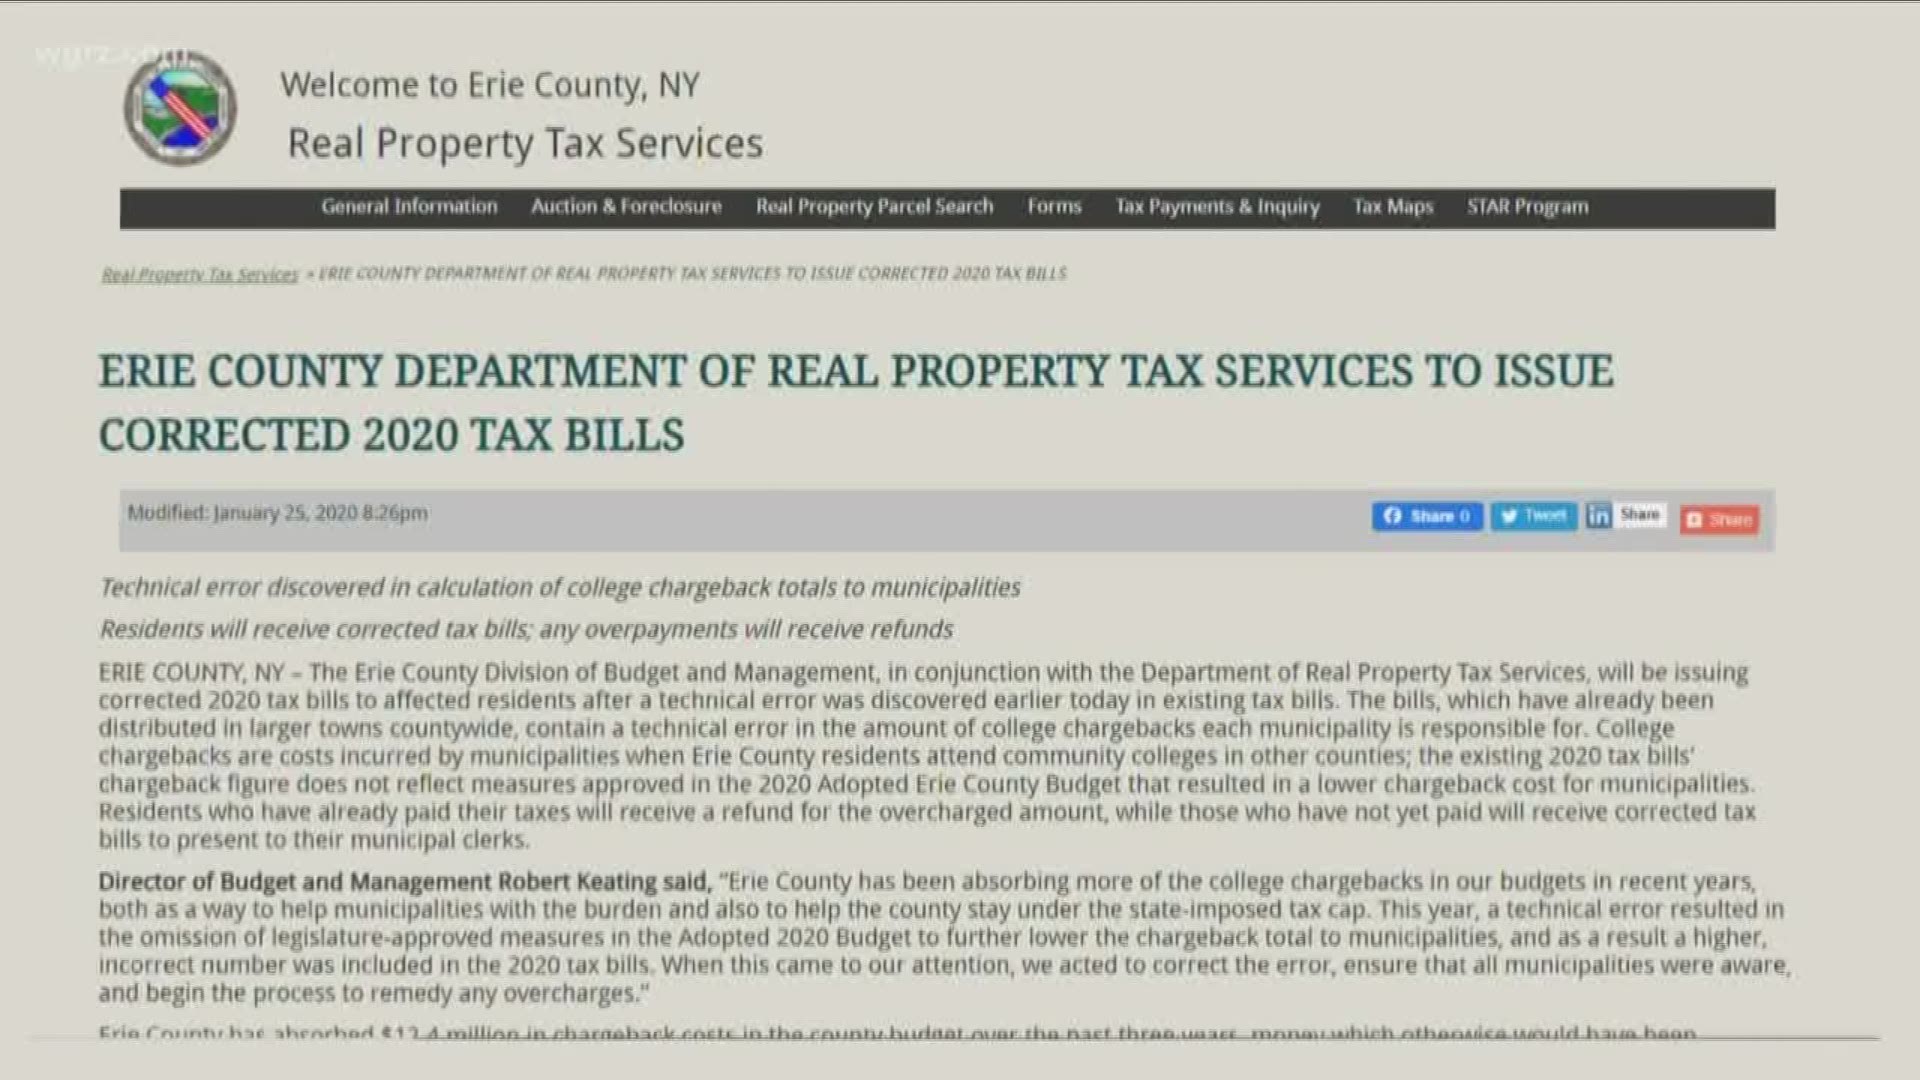 If you already paid your Erie county property taxes for this year, expect a new bill and a refund because the County didn't get all the budget numbers right.